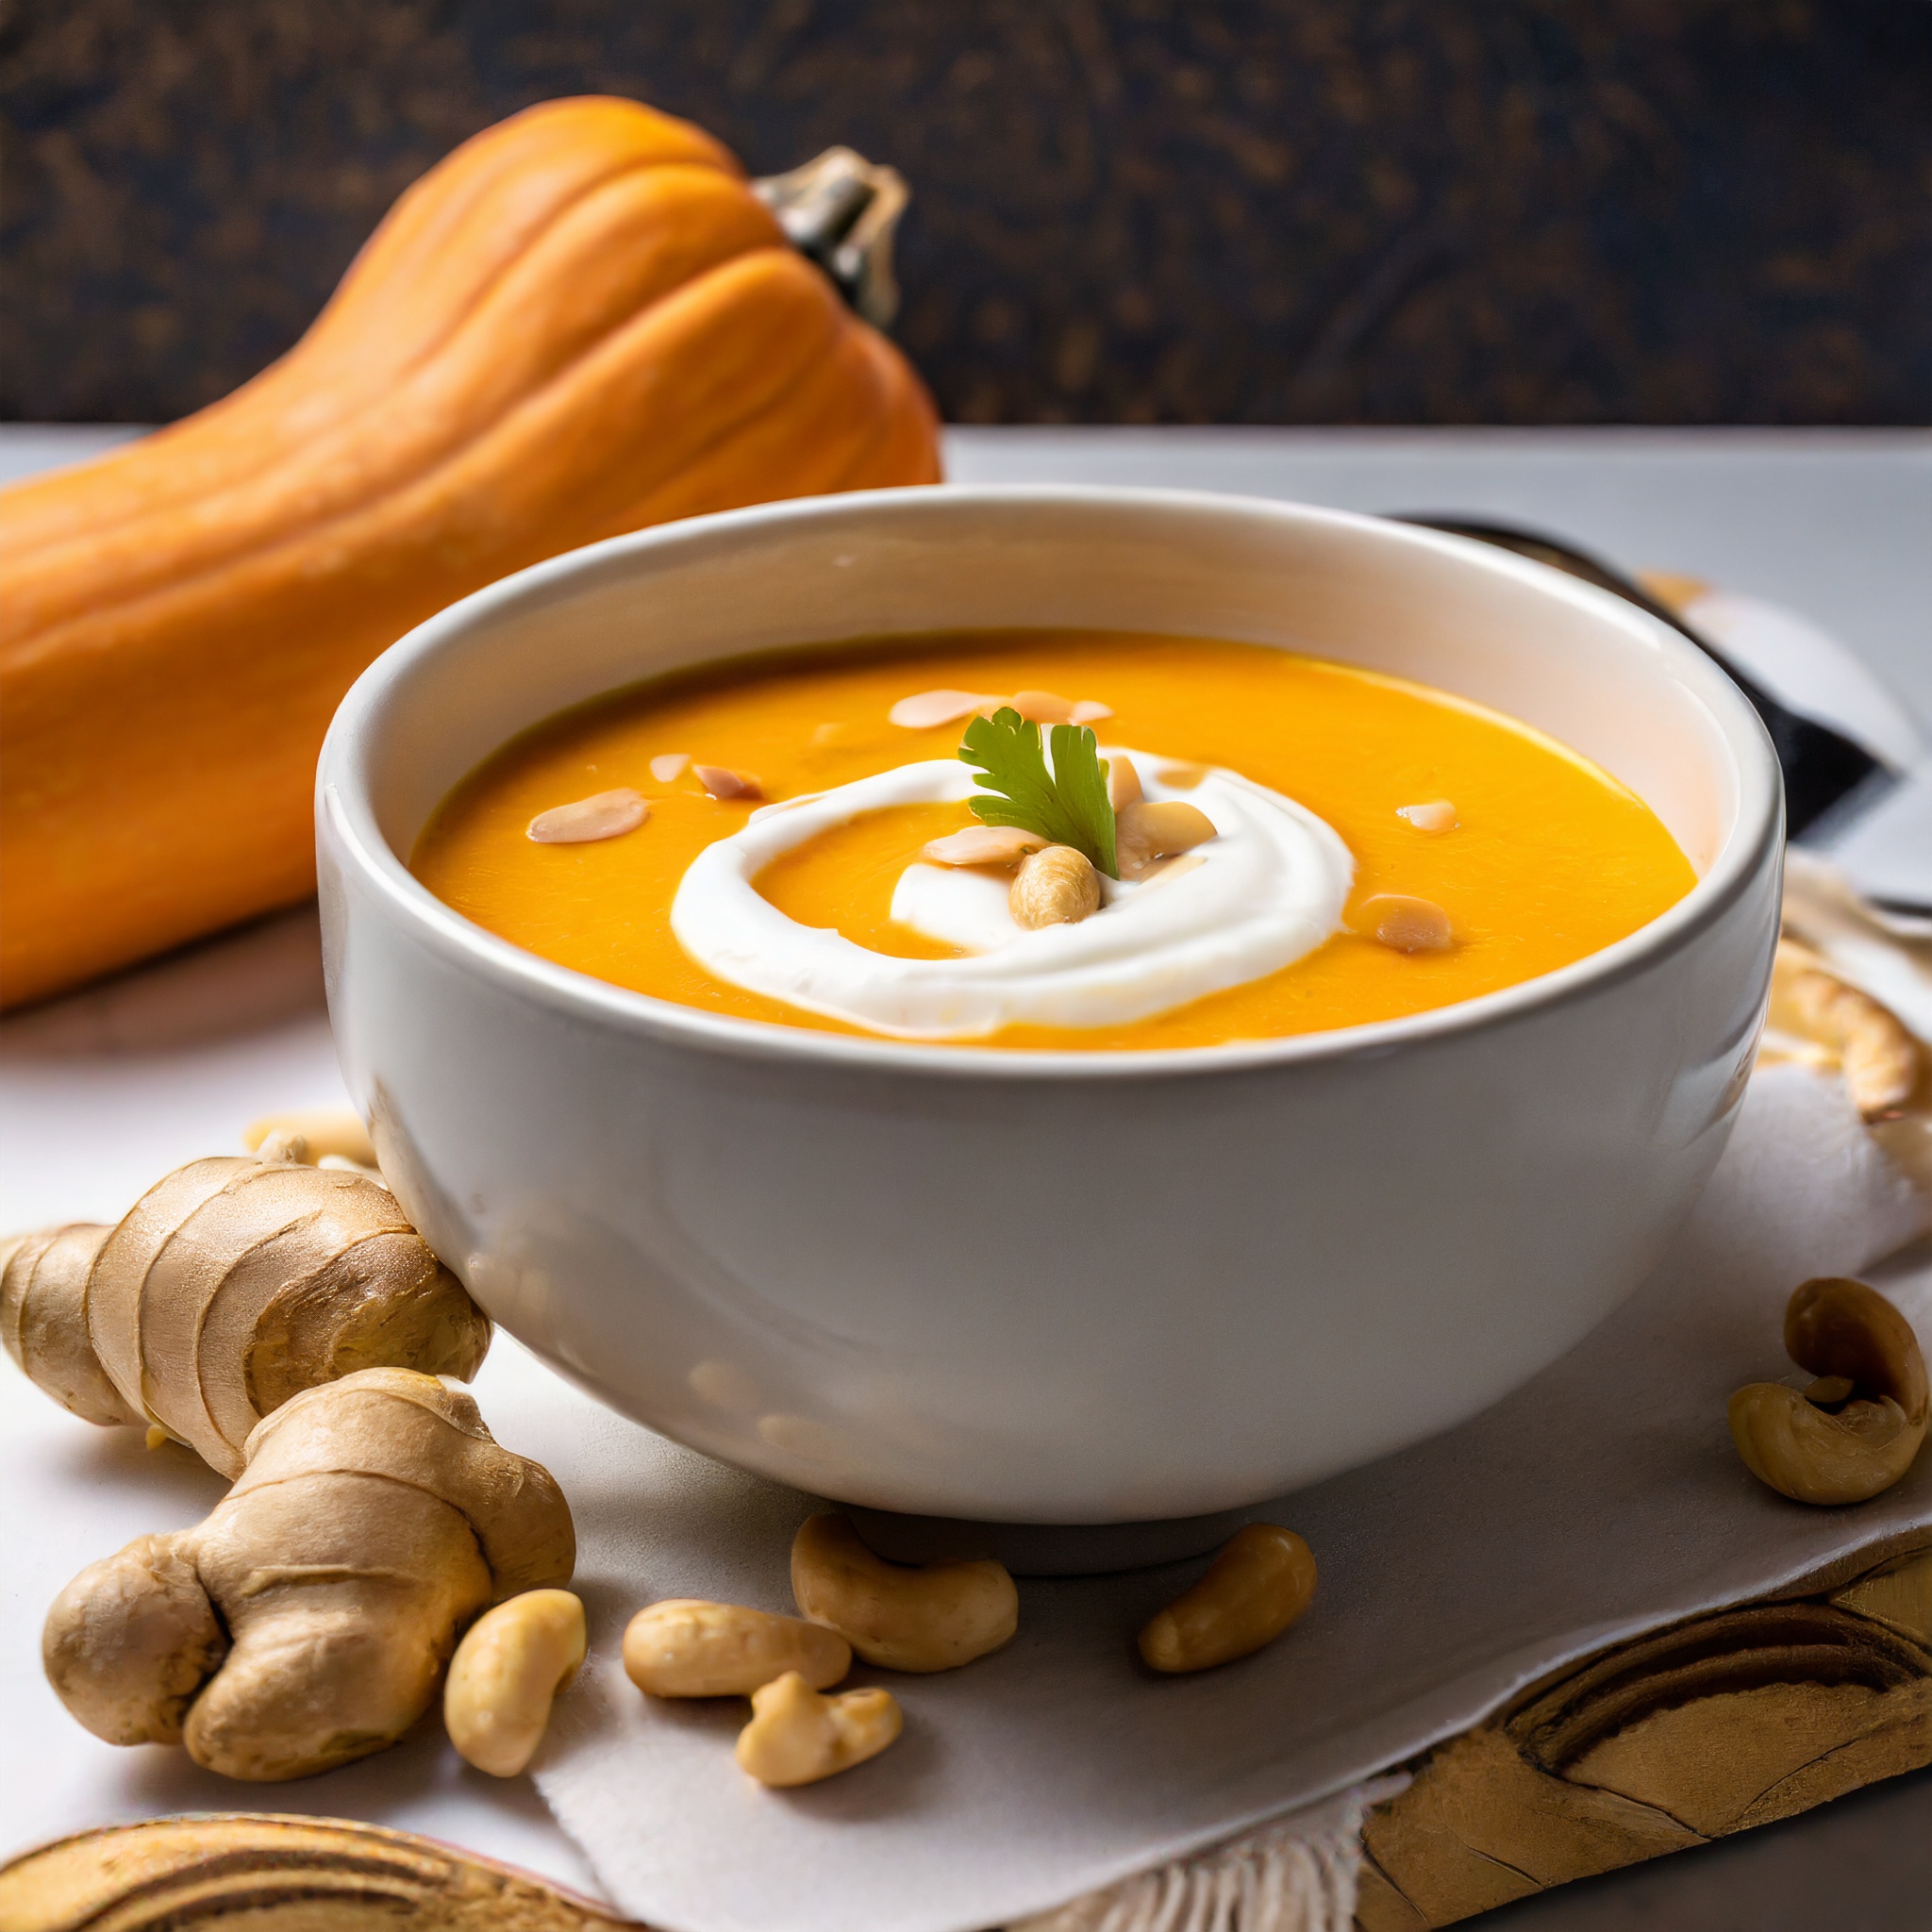 Firefly_Butternut_squash_soup_with_cashews_and_a_yogurt_swirl_in_it._whole_ginger_root_next_to_bowl Promoting Health and Wellbeing with Reiki and Other Holistic Practices - Inspirit Studios - Results from #5